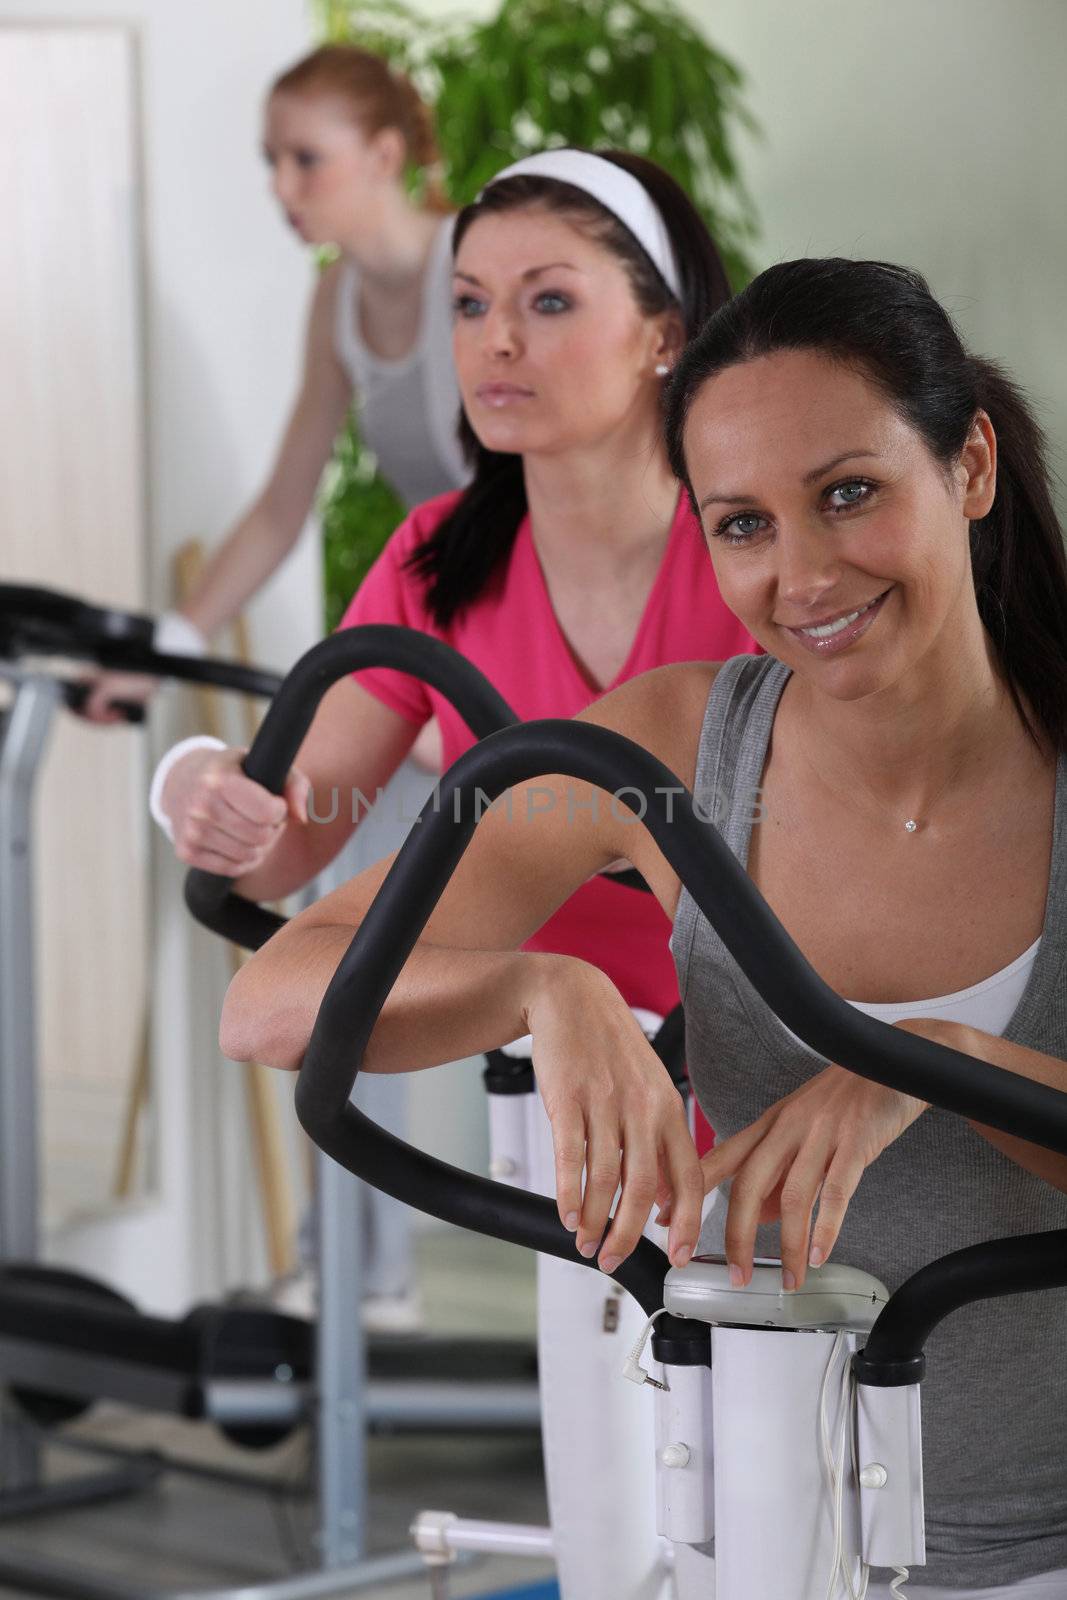 Women exercising at the gym by phovoir